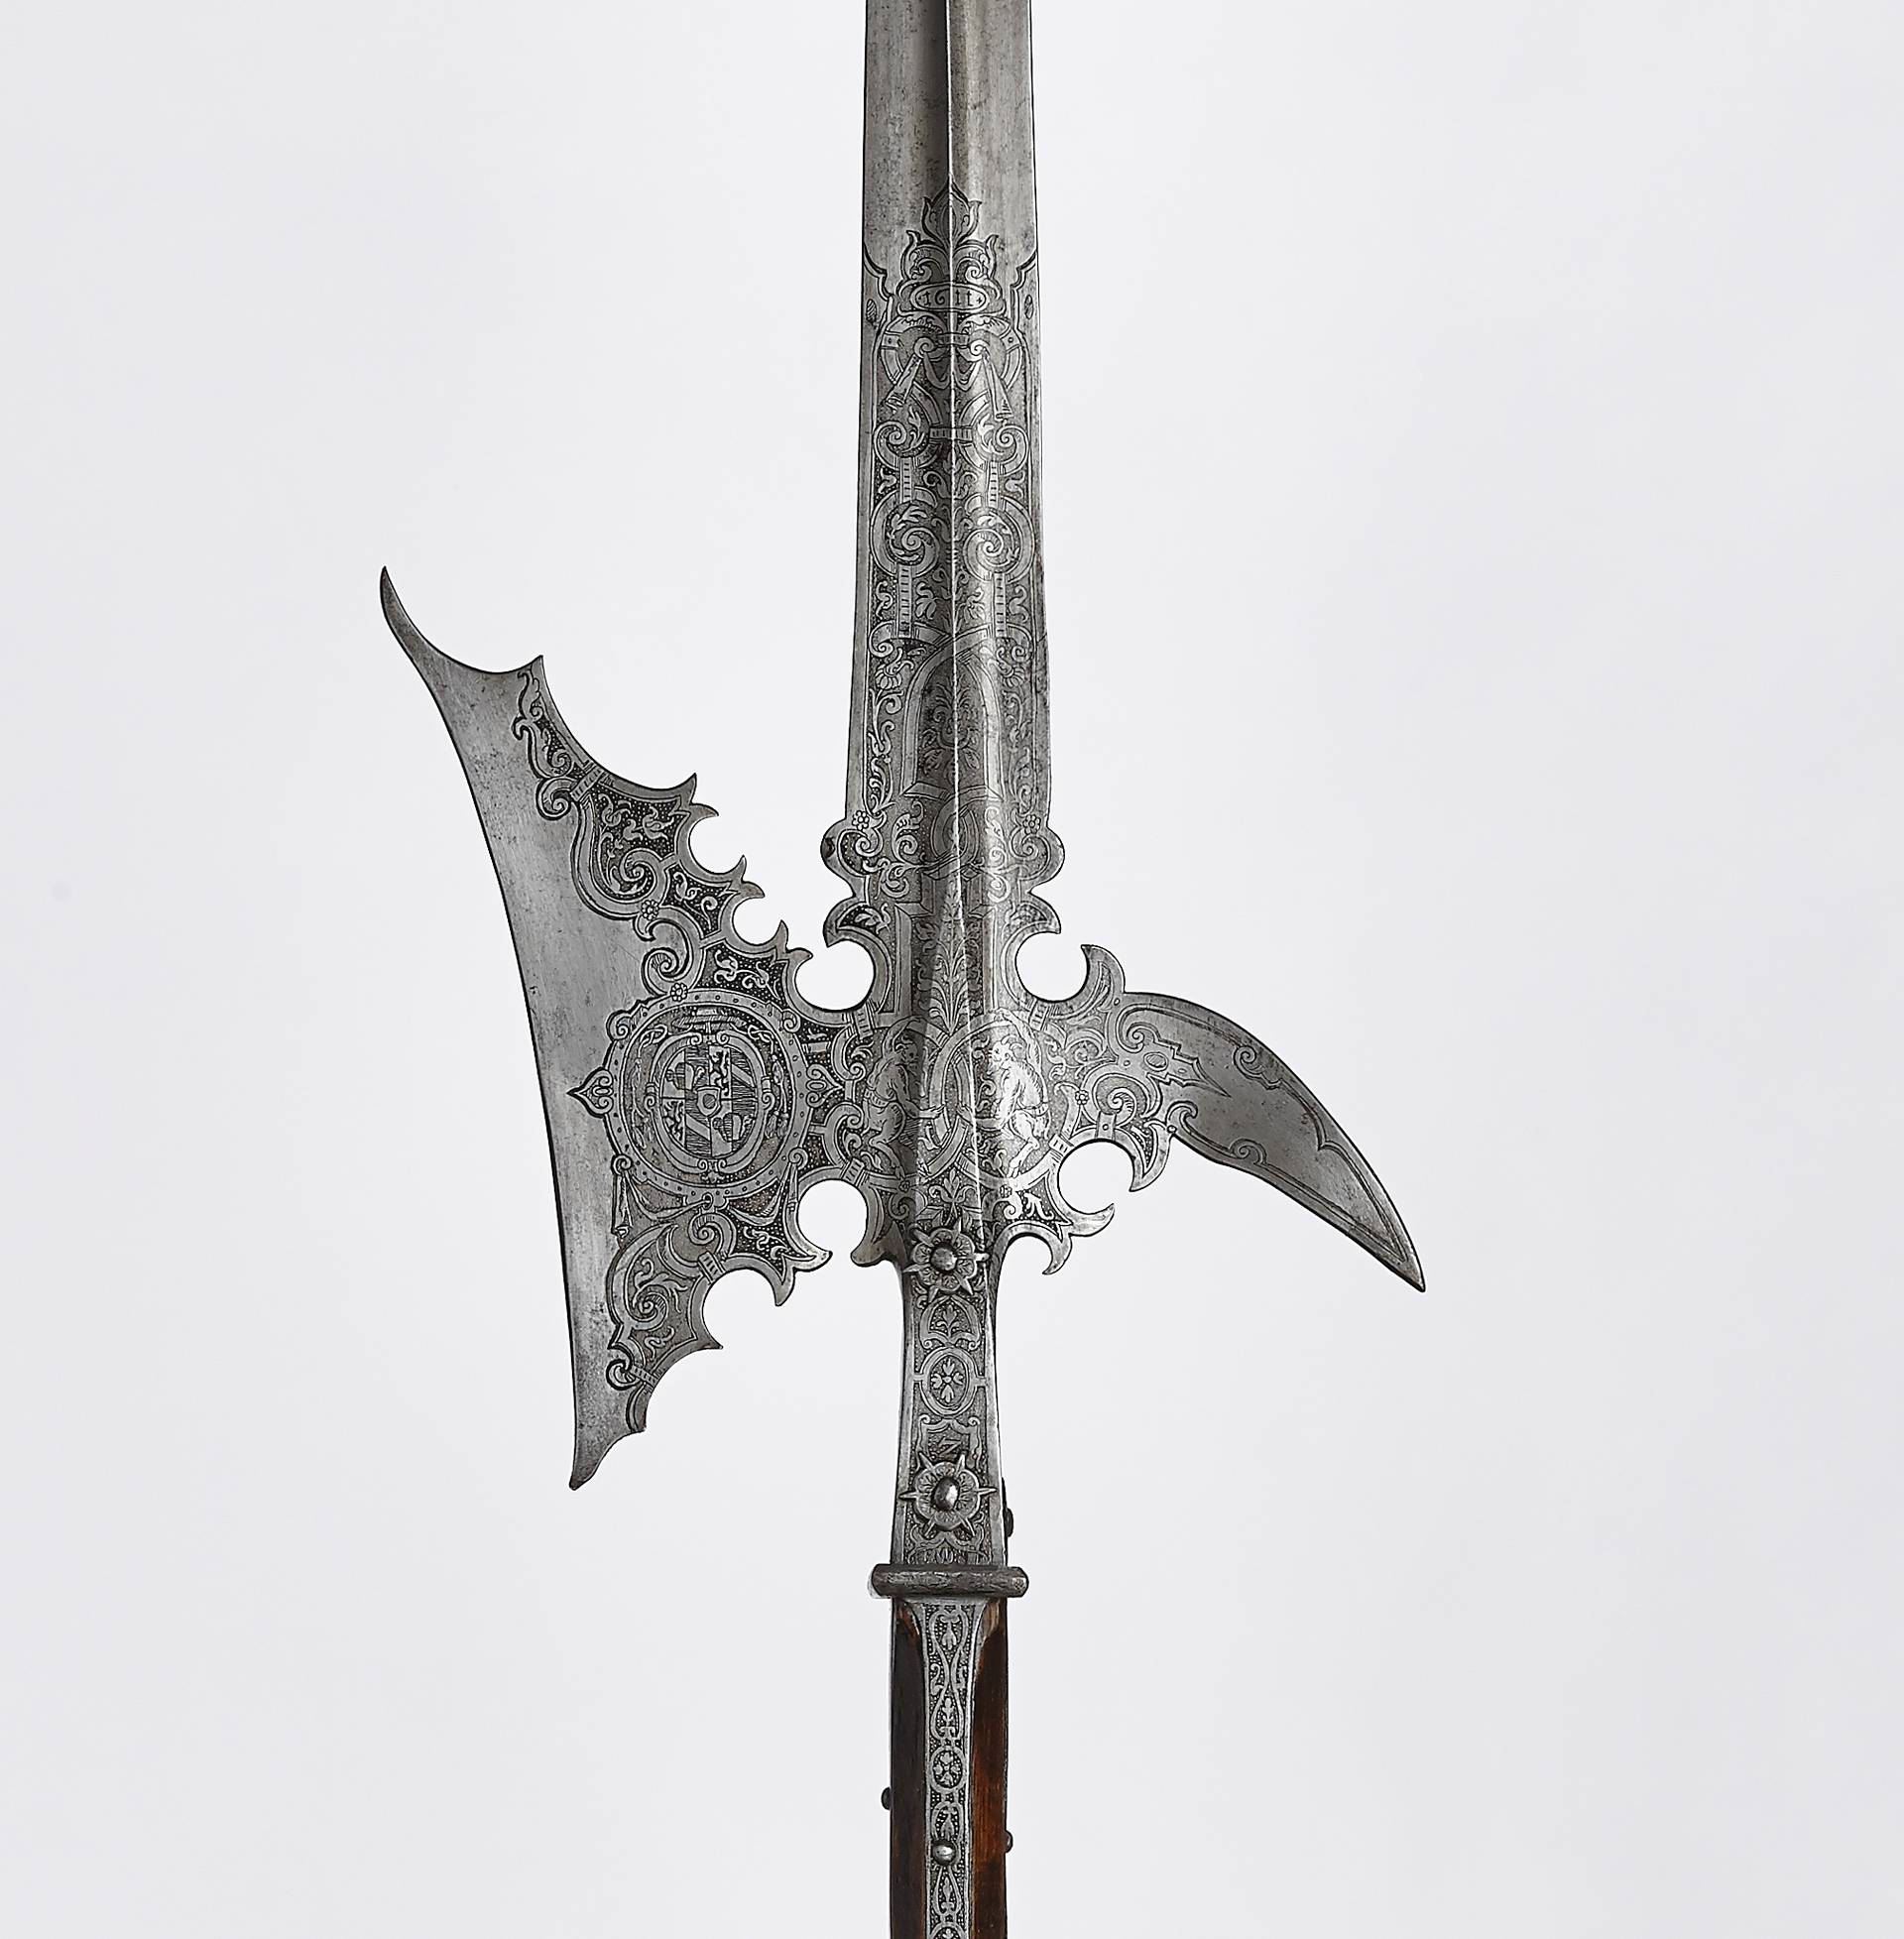 Halberd of Archbishop Wolf Dietrich’s bodyguard, ornamental high etching with coat of arms and “Teuferln” (little devils), 1611, iron, inv. no. WA 1066